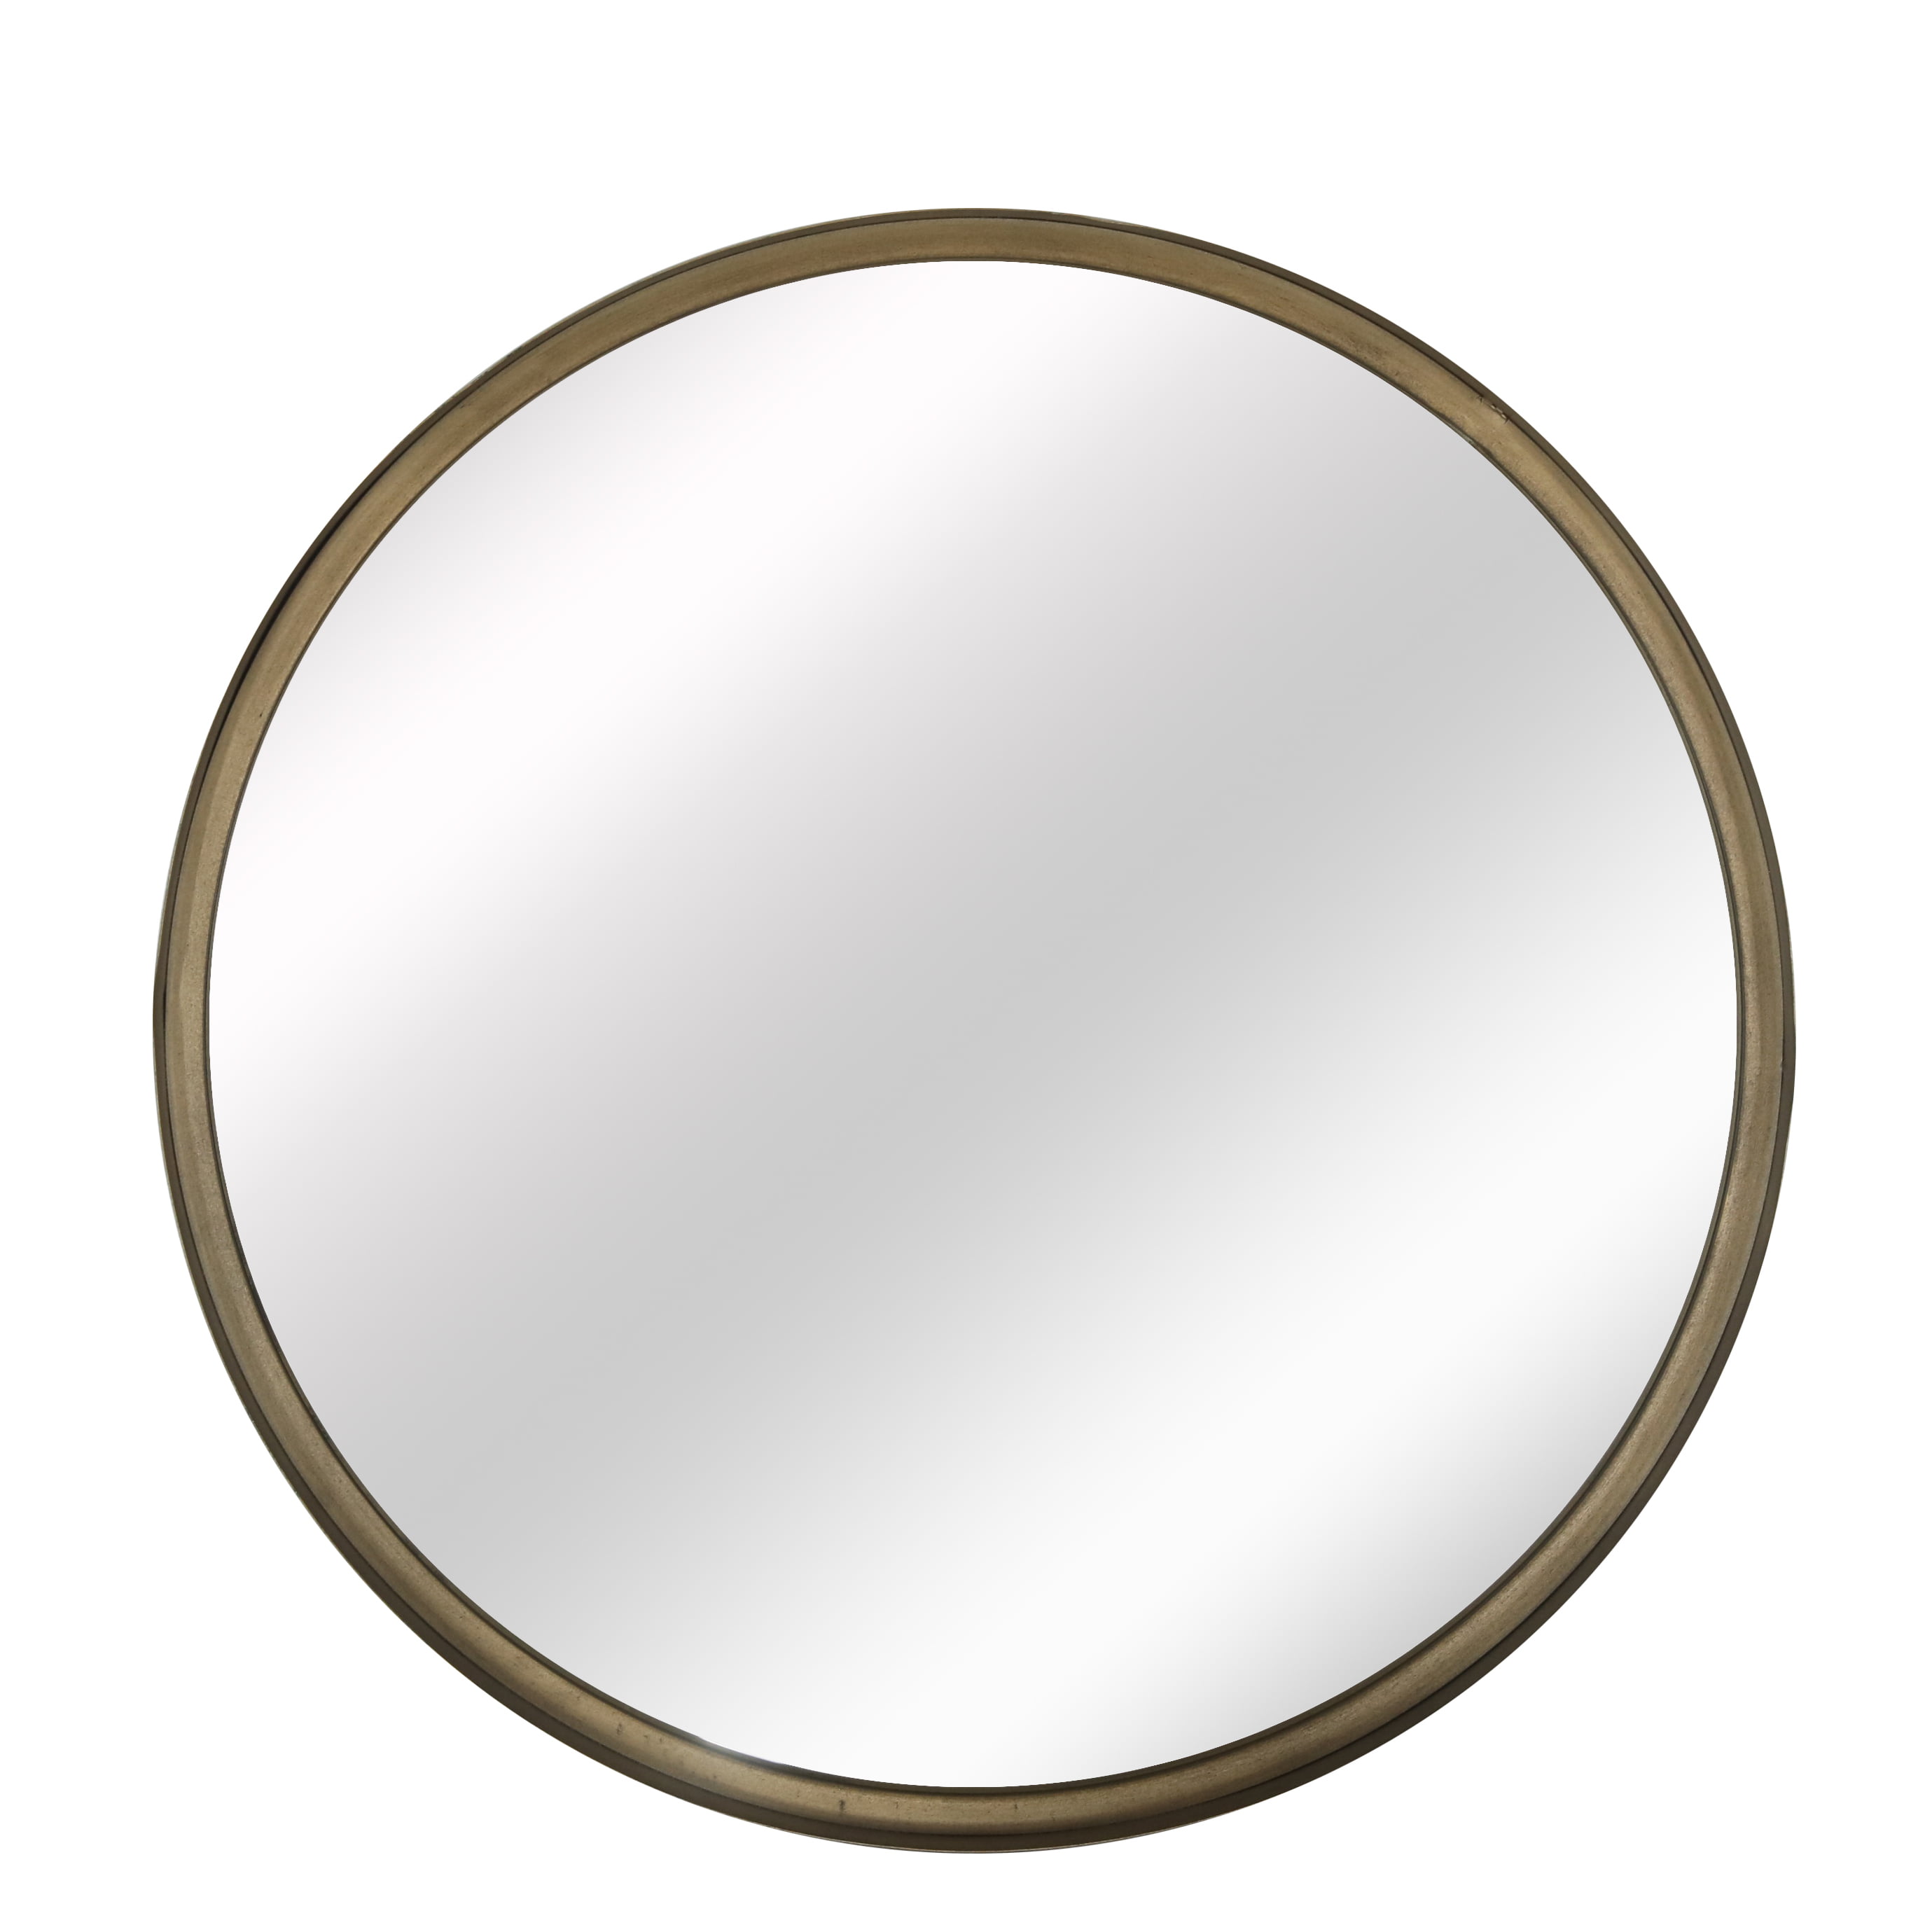 0.75 x 0.75" Planar Aluminum Coated Mirrors on Low Cost Adjustable Mount